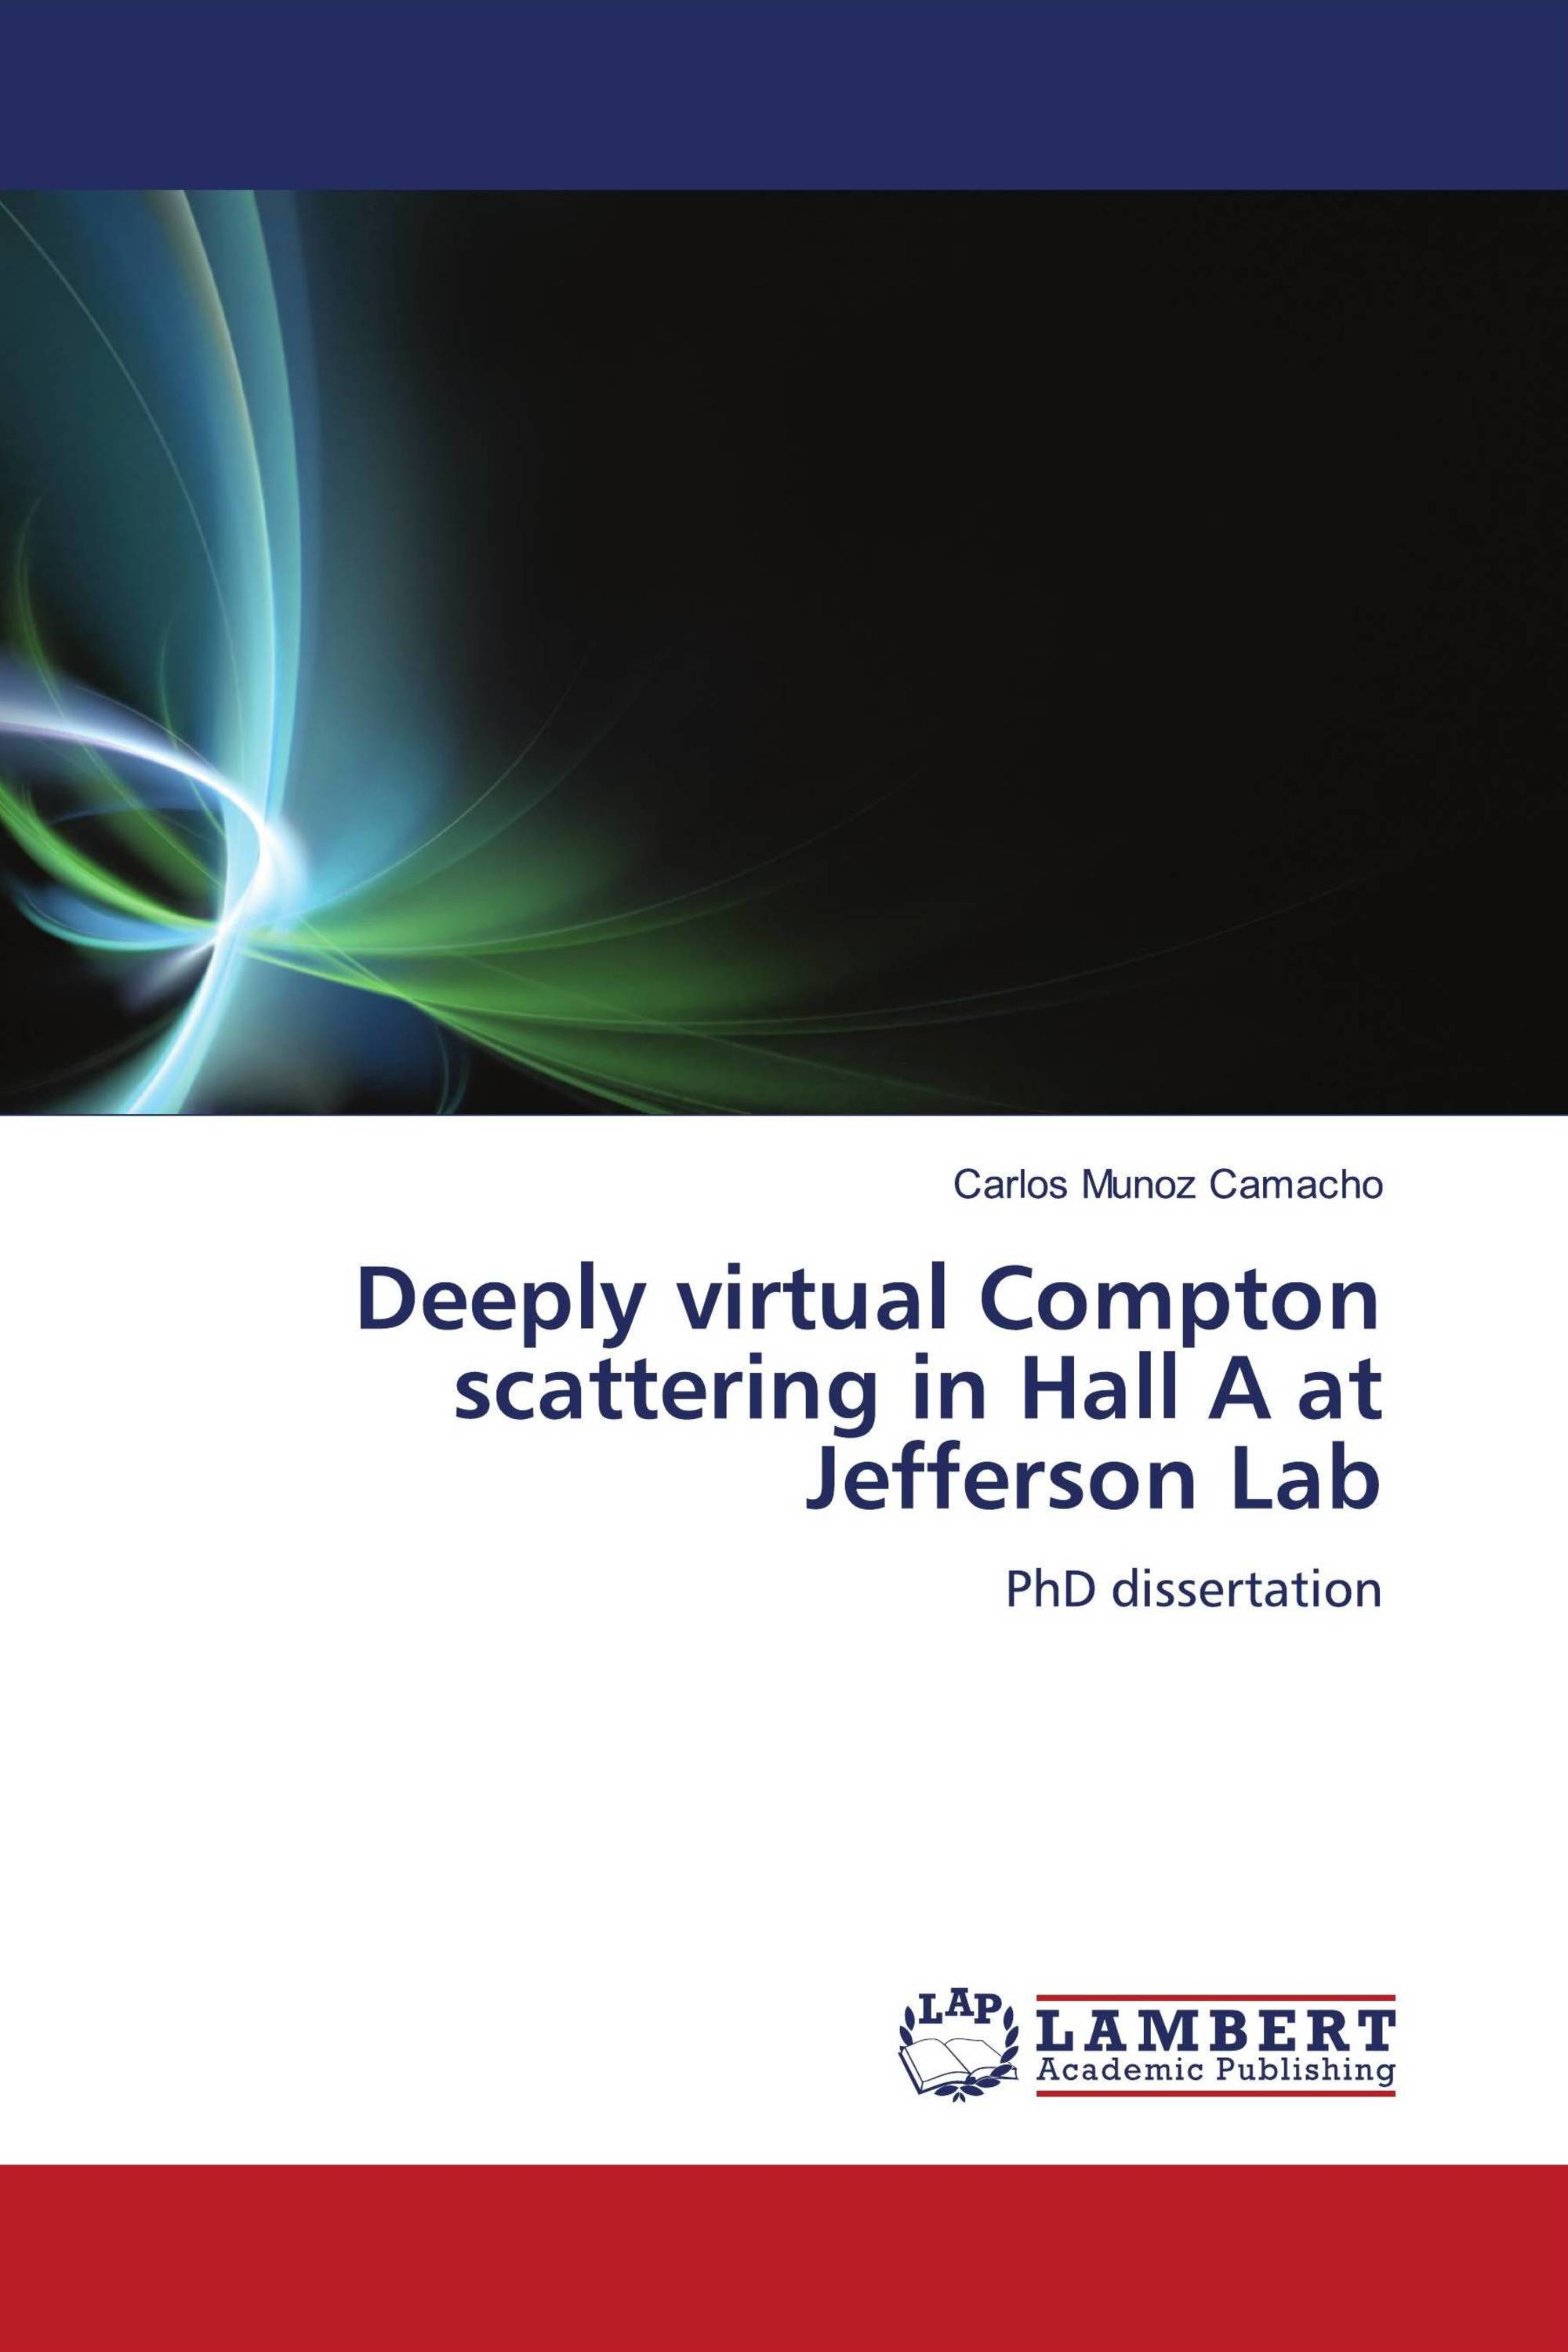 Deeply virtual Compton scattering in Hall A at Jefferson Lab